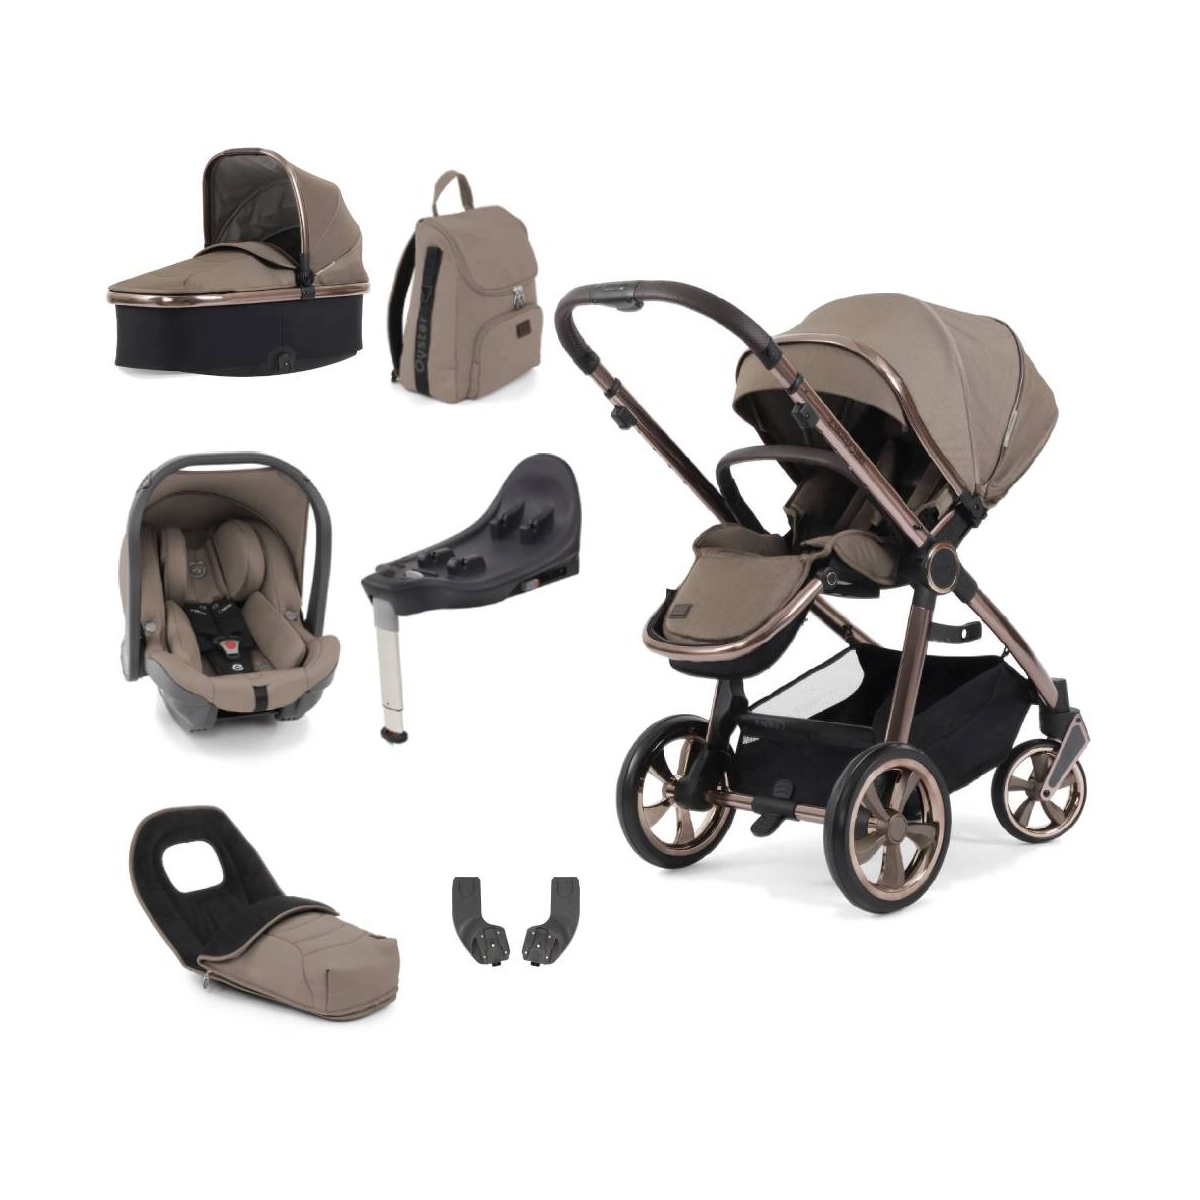 BabyStyle Oyster 3 Bronze Chassis 7 Piece Luxury Travel System